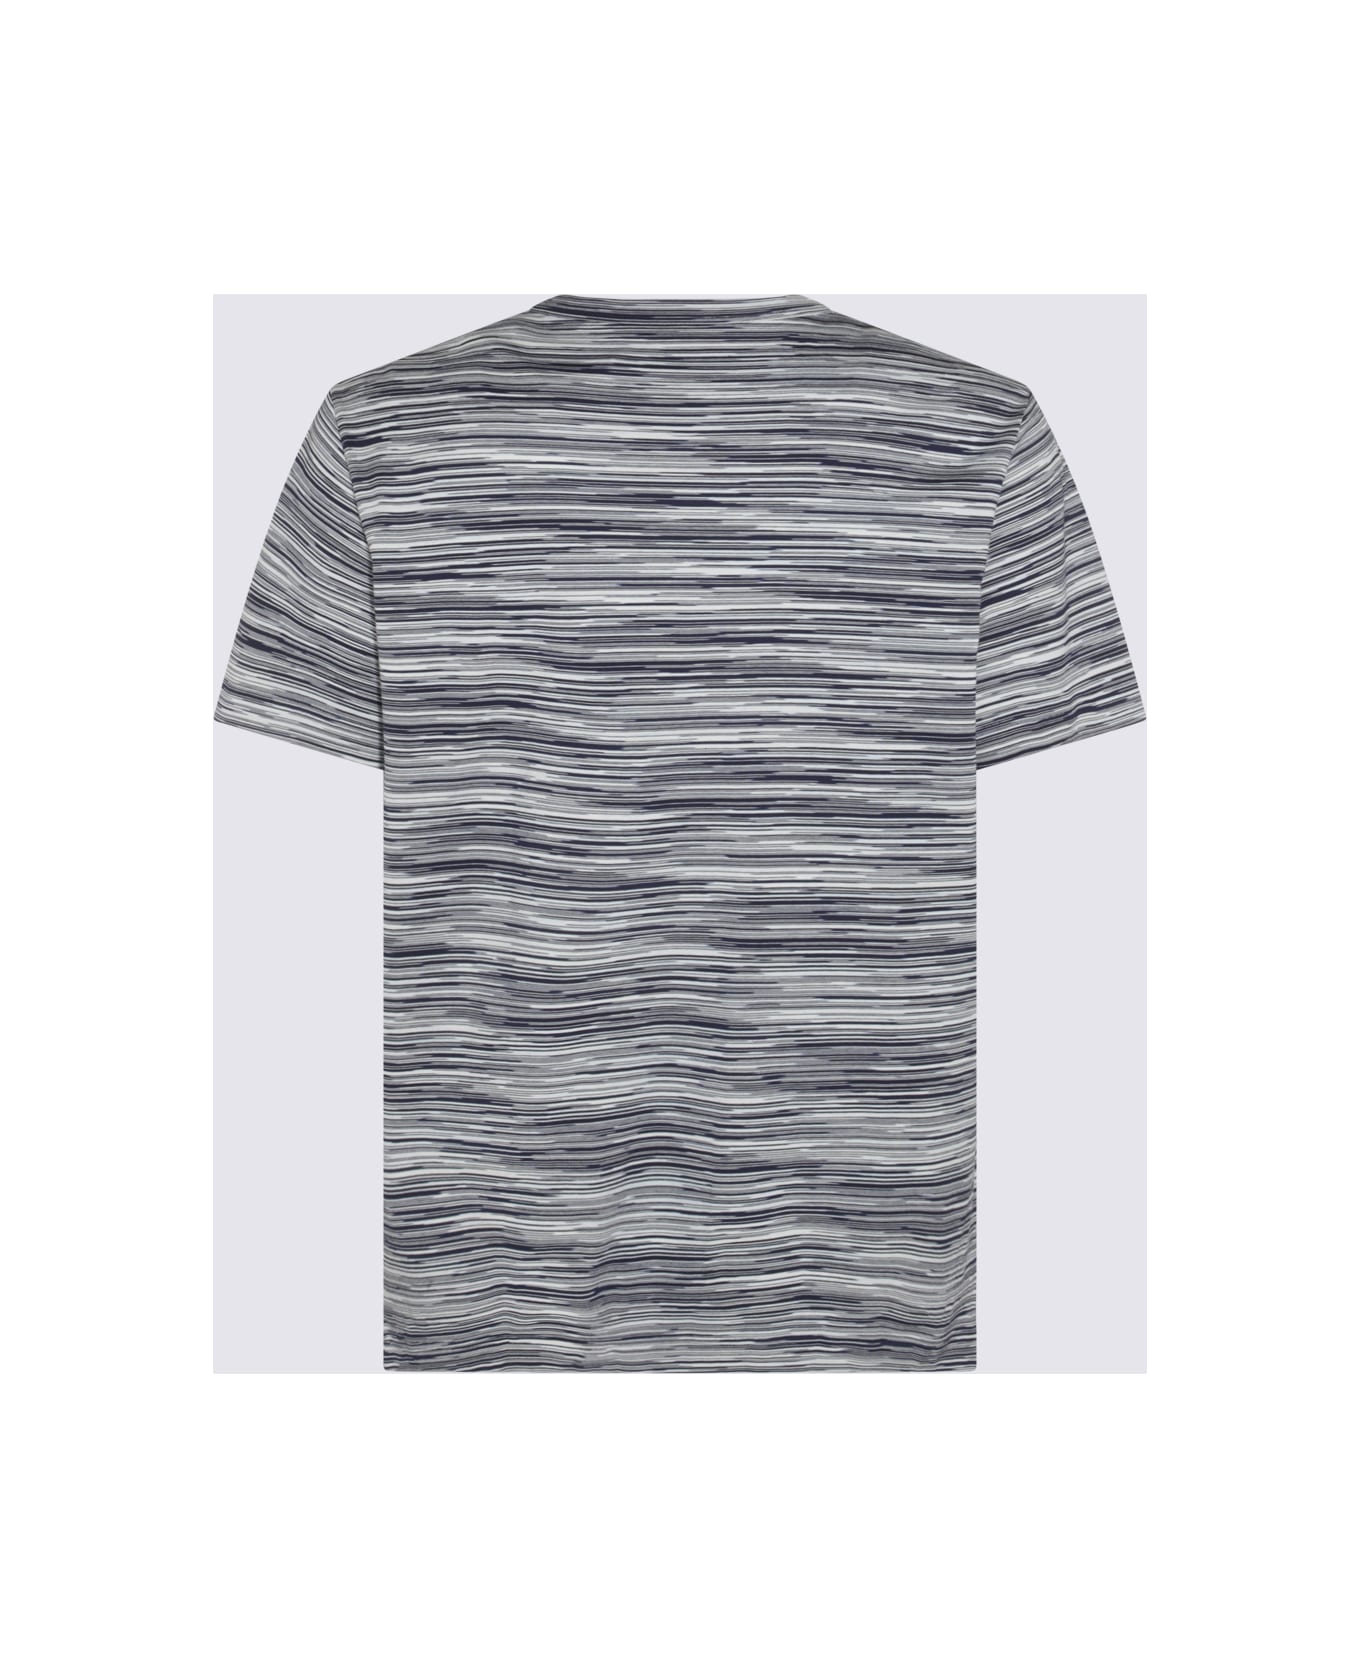 Missoni Multicolor Cotton T-shirt - SPACE DYED NAVY WHITE